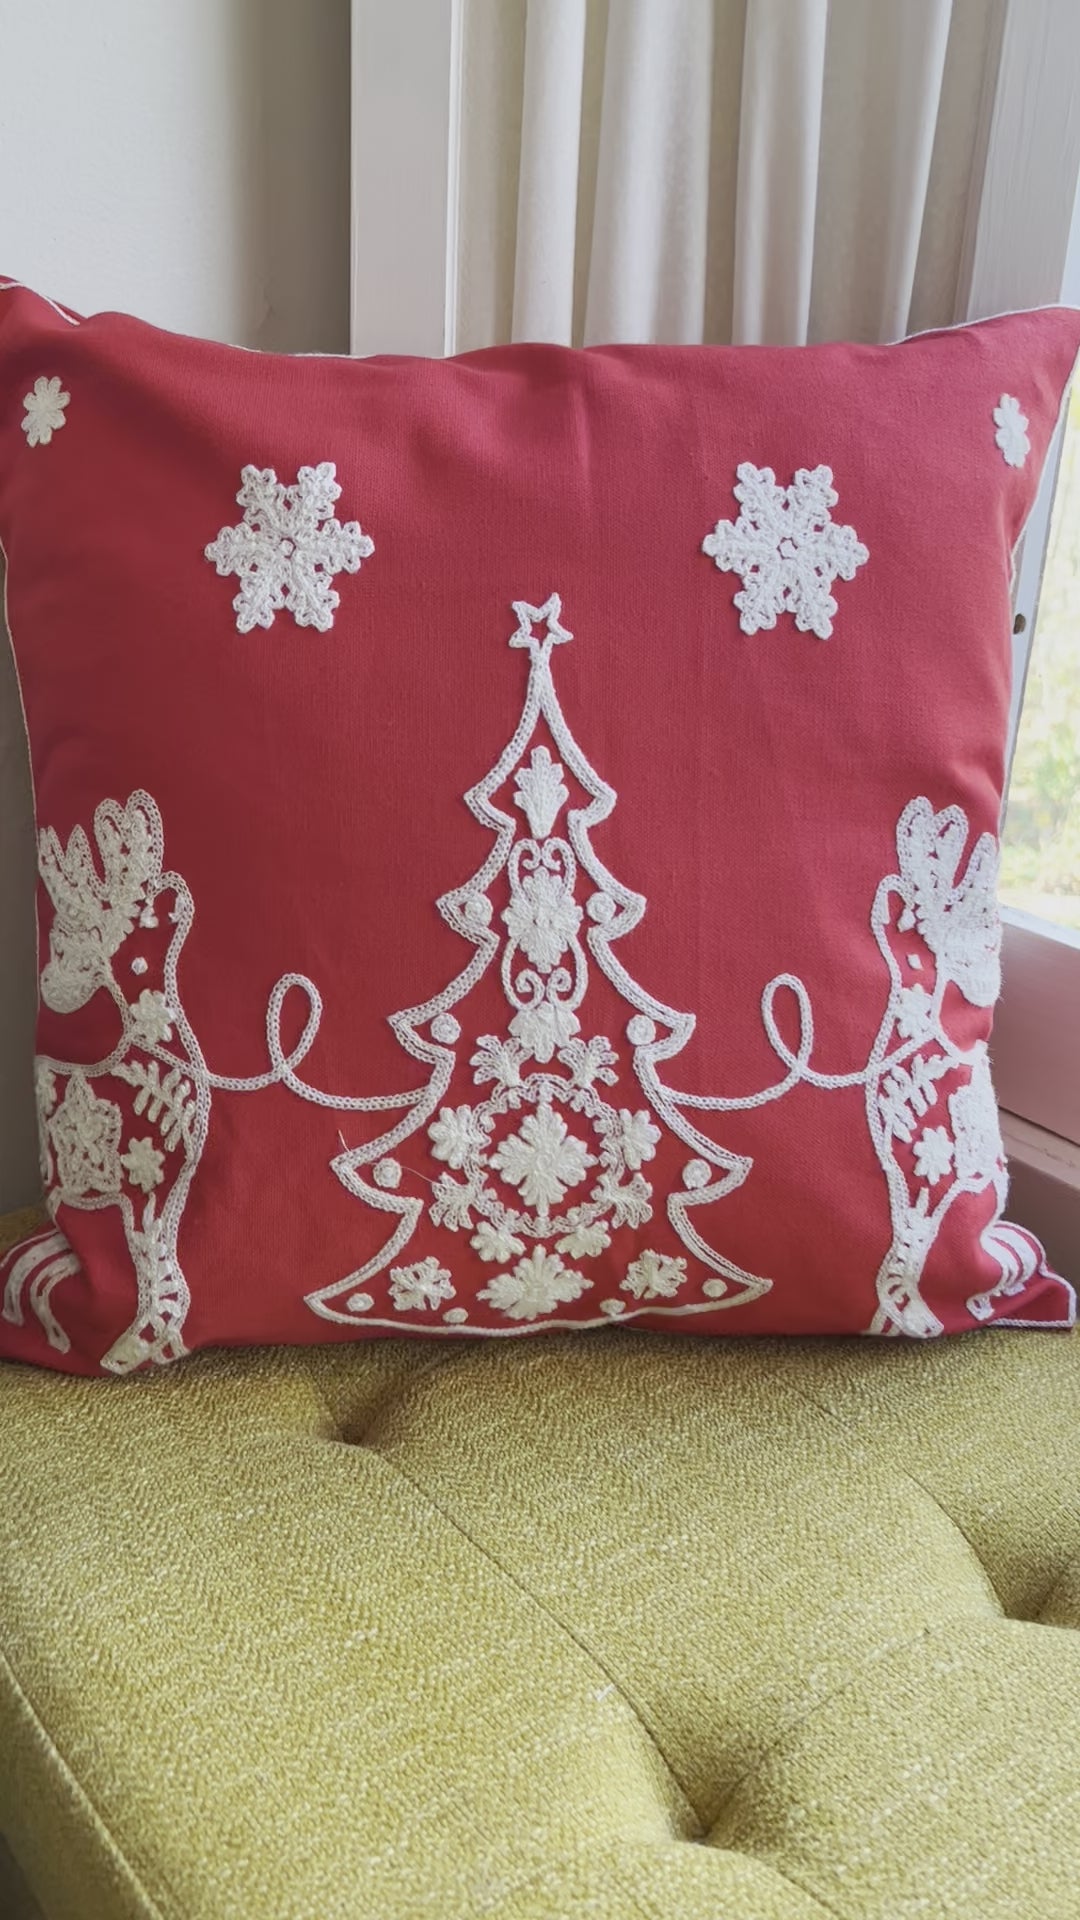 Santa and Sleigh Embroidered Throw Pillow Cover, Holiday Pillows, Neutral  Holiday Decor, Christmas Decorating, Fits 18x18 or 20x20 Inserts 